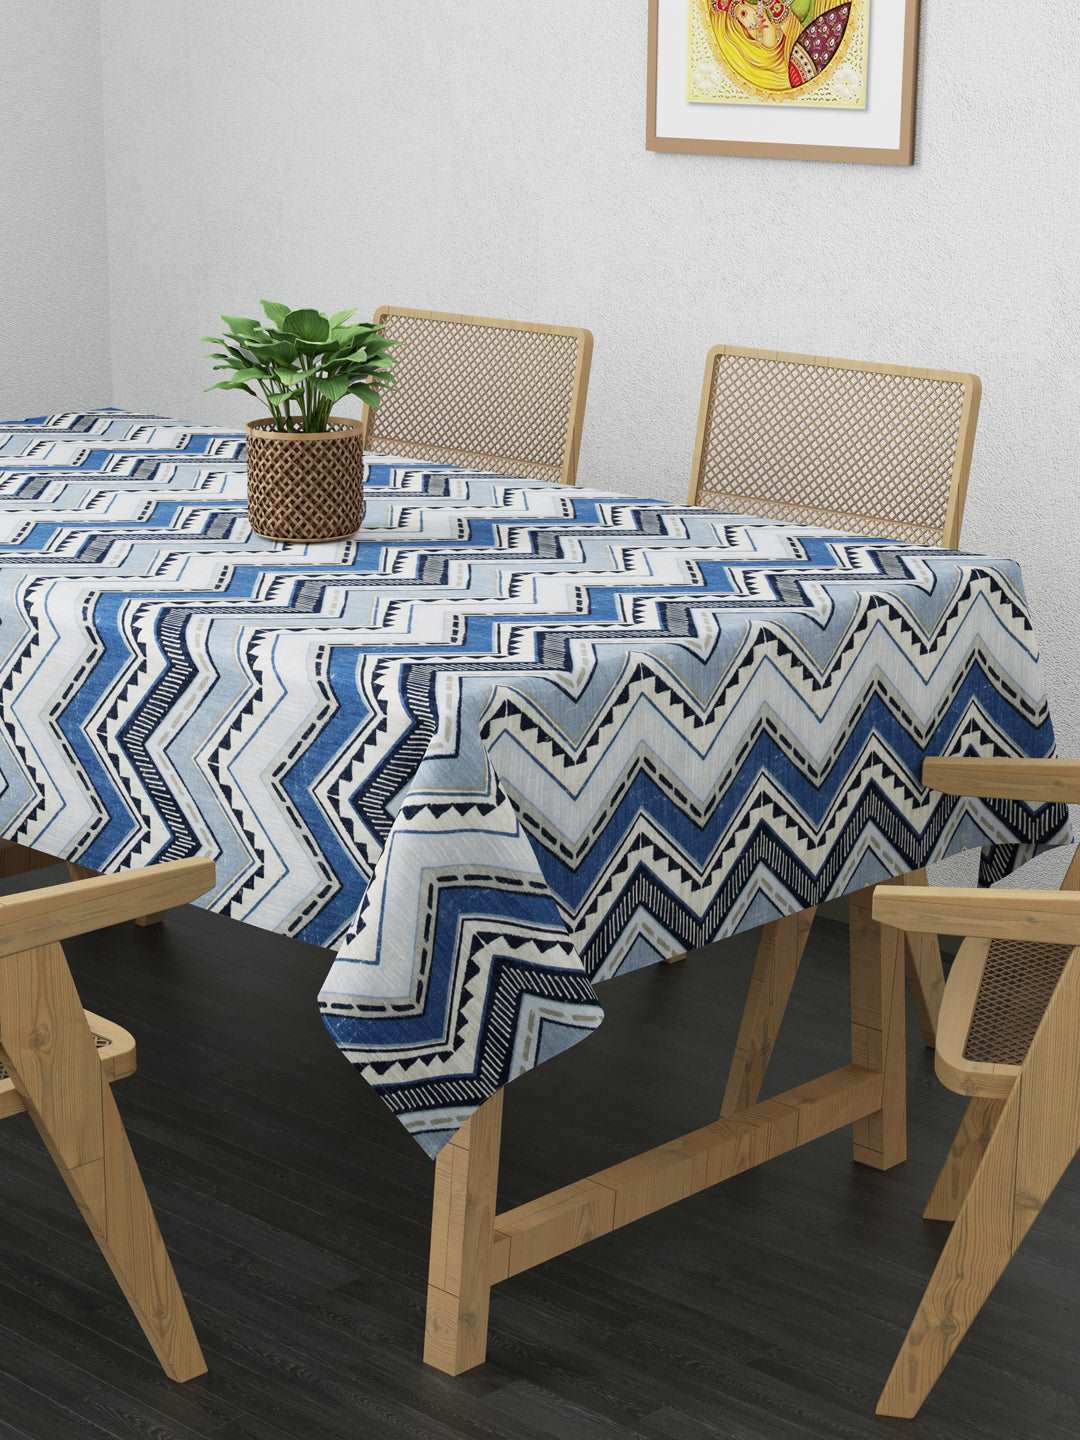 100% Cotton Table Cover 6 Seater, Blue, Grey & Black